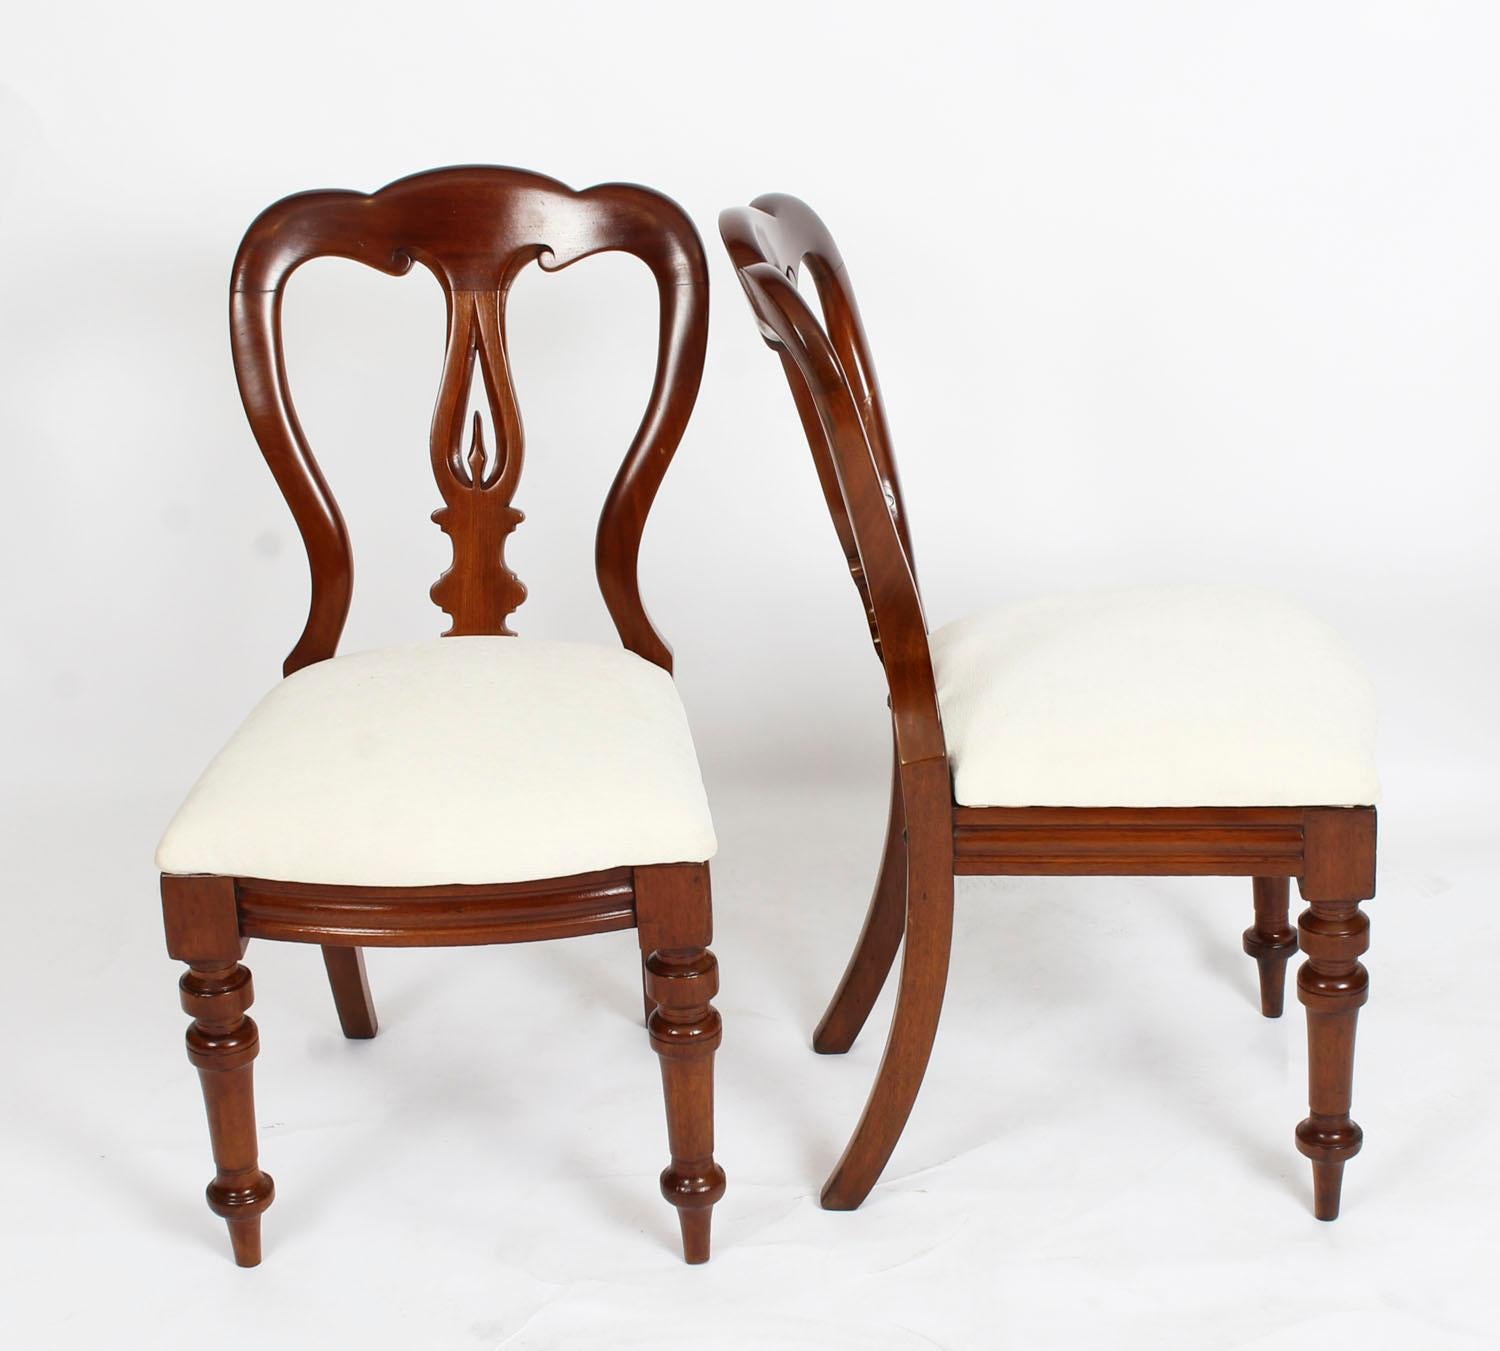 This is a fabulous set of twelve antique English Victorian spoon back dining chairs, circa 1870 in date.

The set comprises twelve side chairs all masterfully crafted in beautiful solid mahogany. They each have elegant spoon backs and are raised on